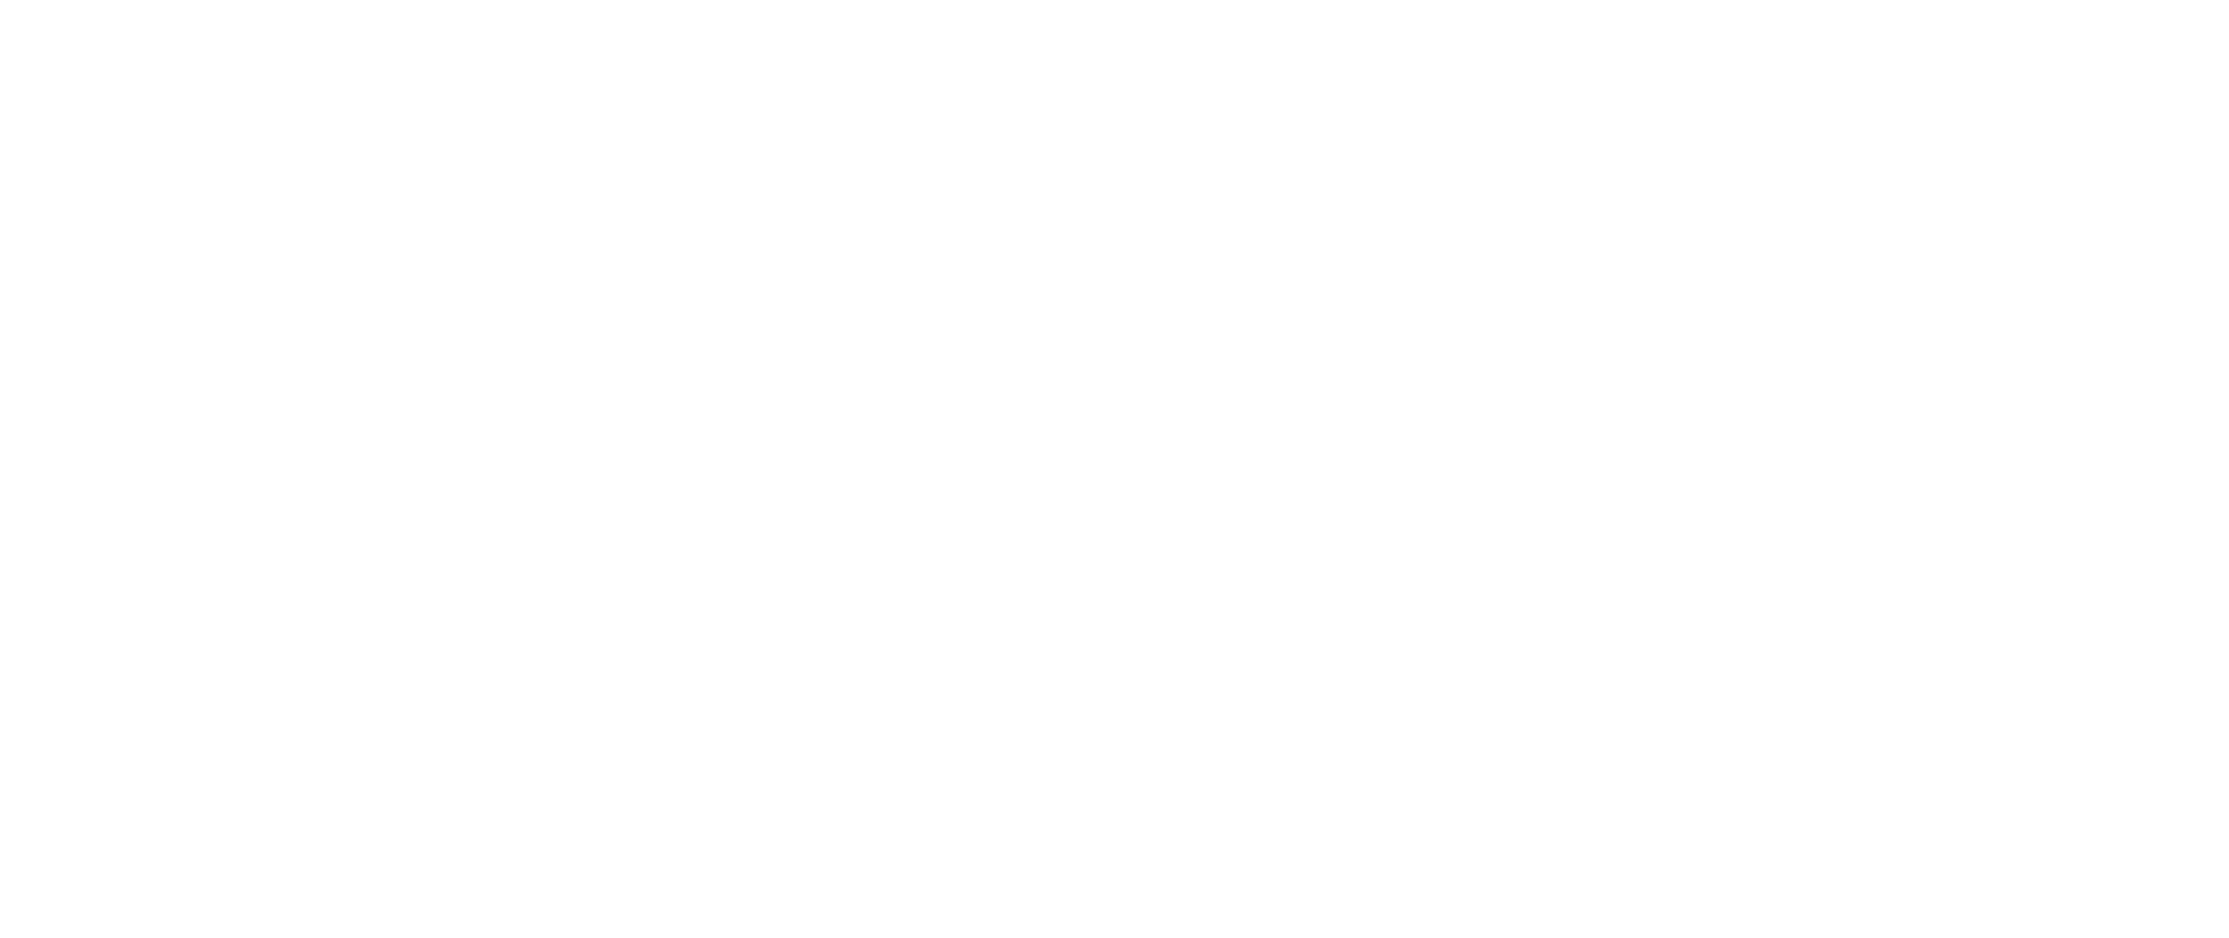 question critical thinking